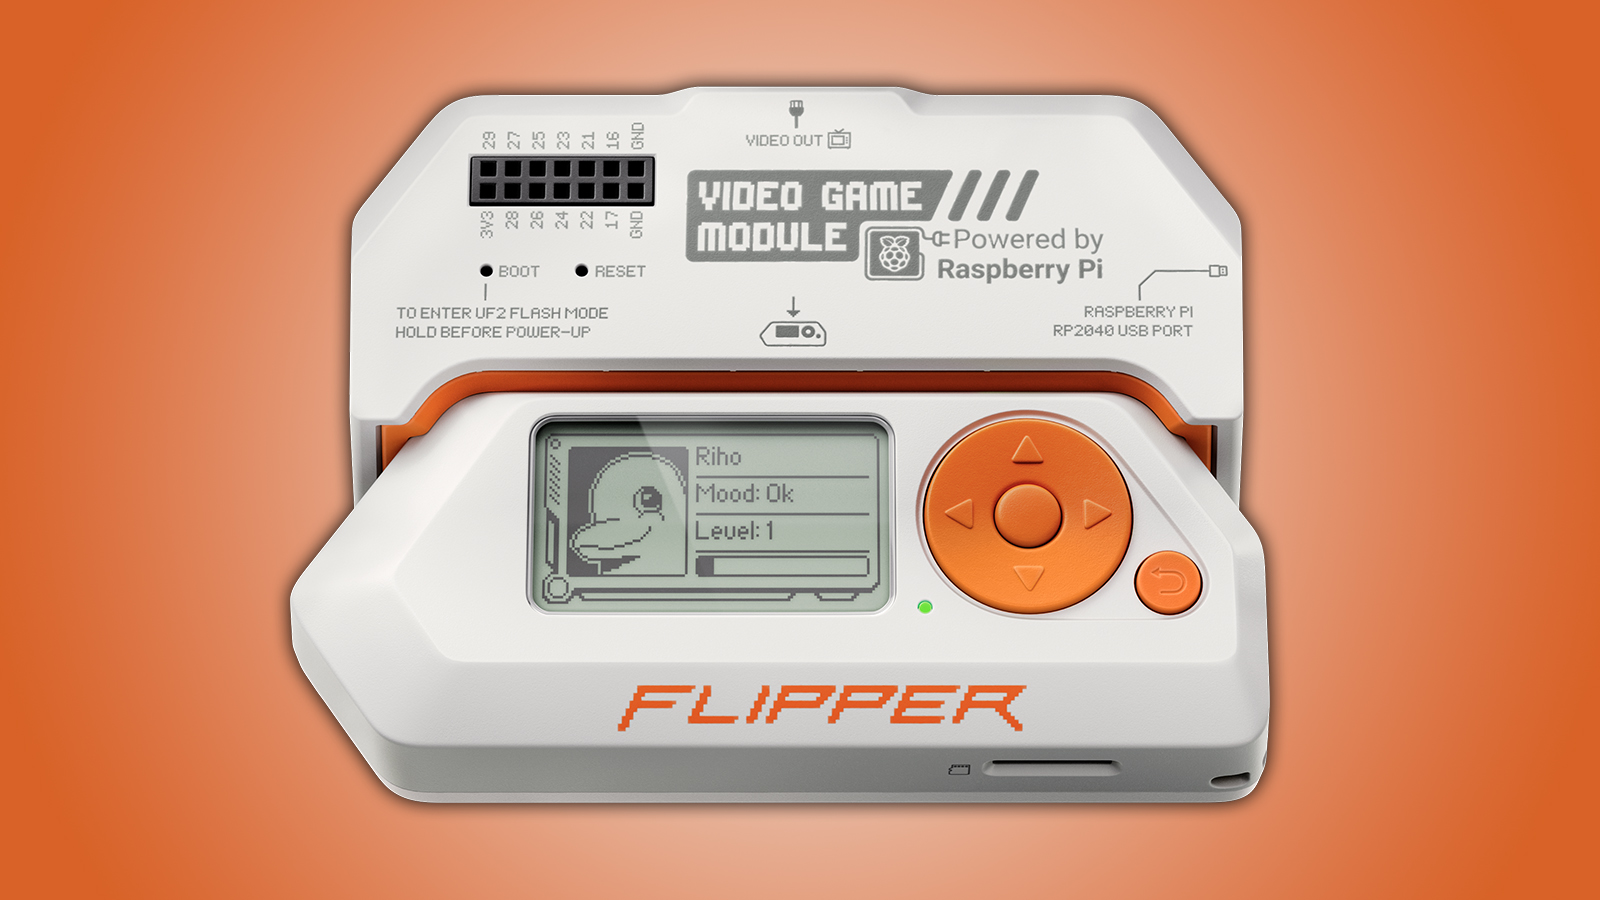 Incredible Collaboration: Flipper Zero and Raspberry Pi Combine Forces for State-of-the-Art Video Game Module